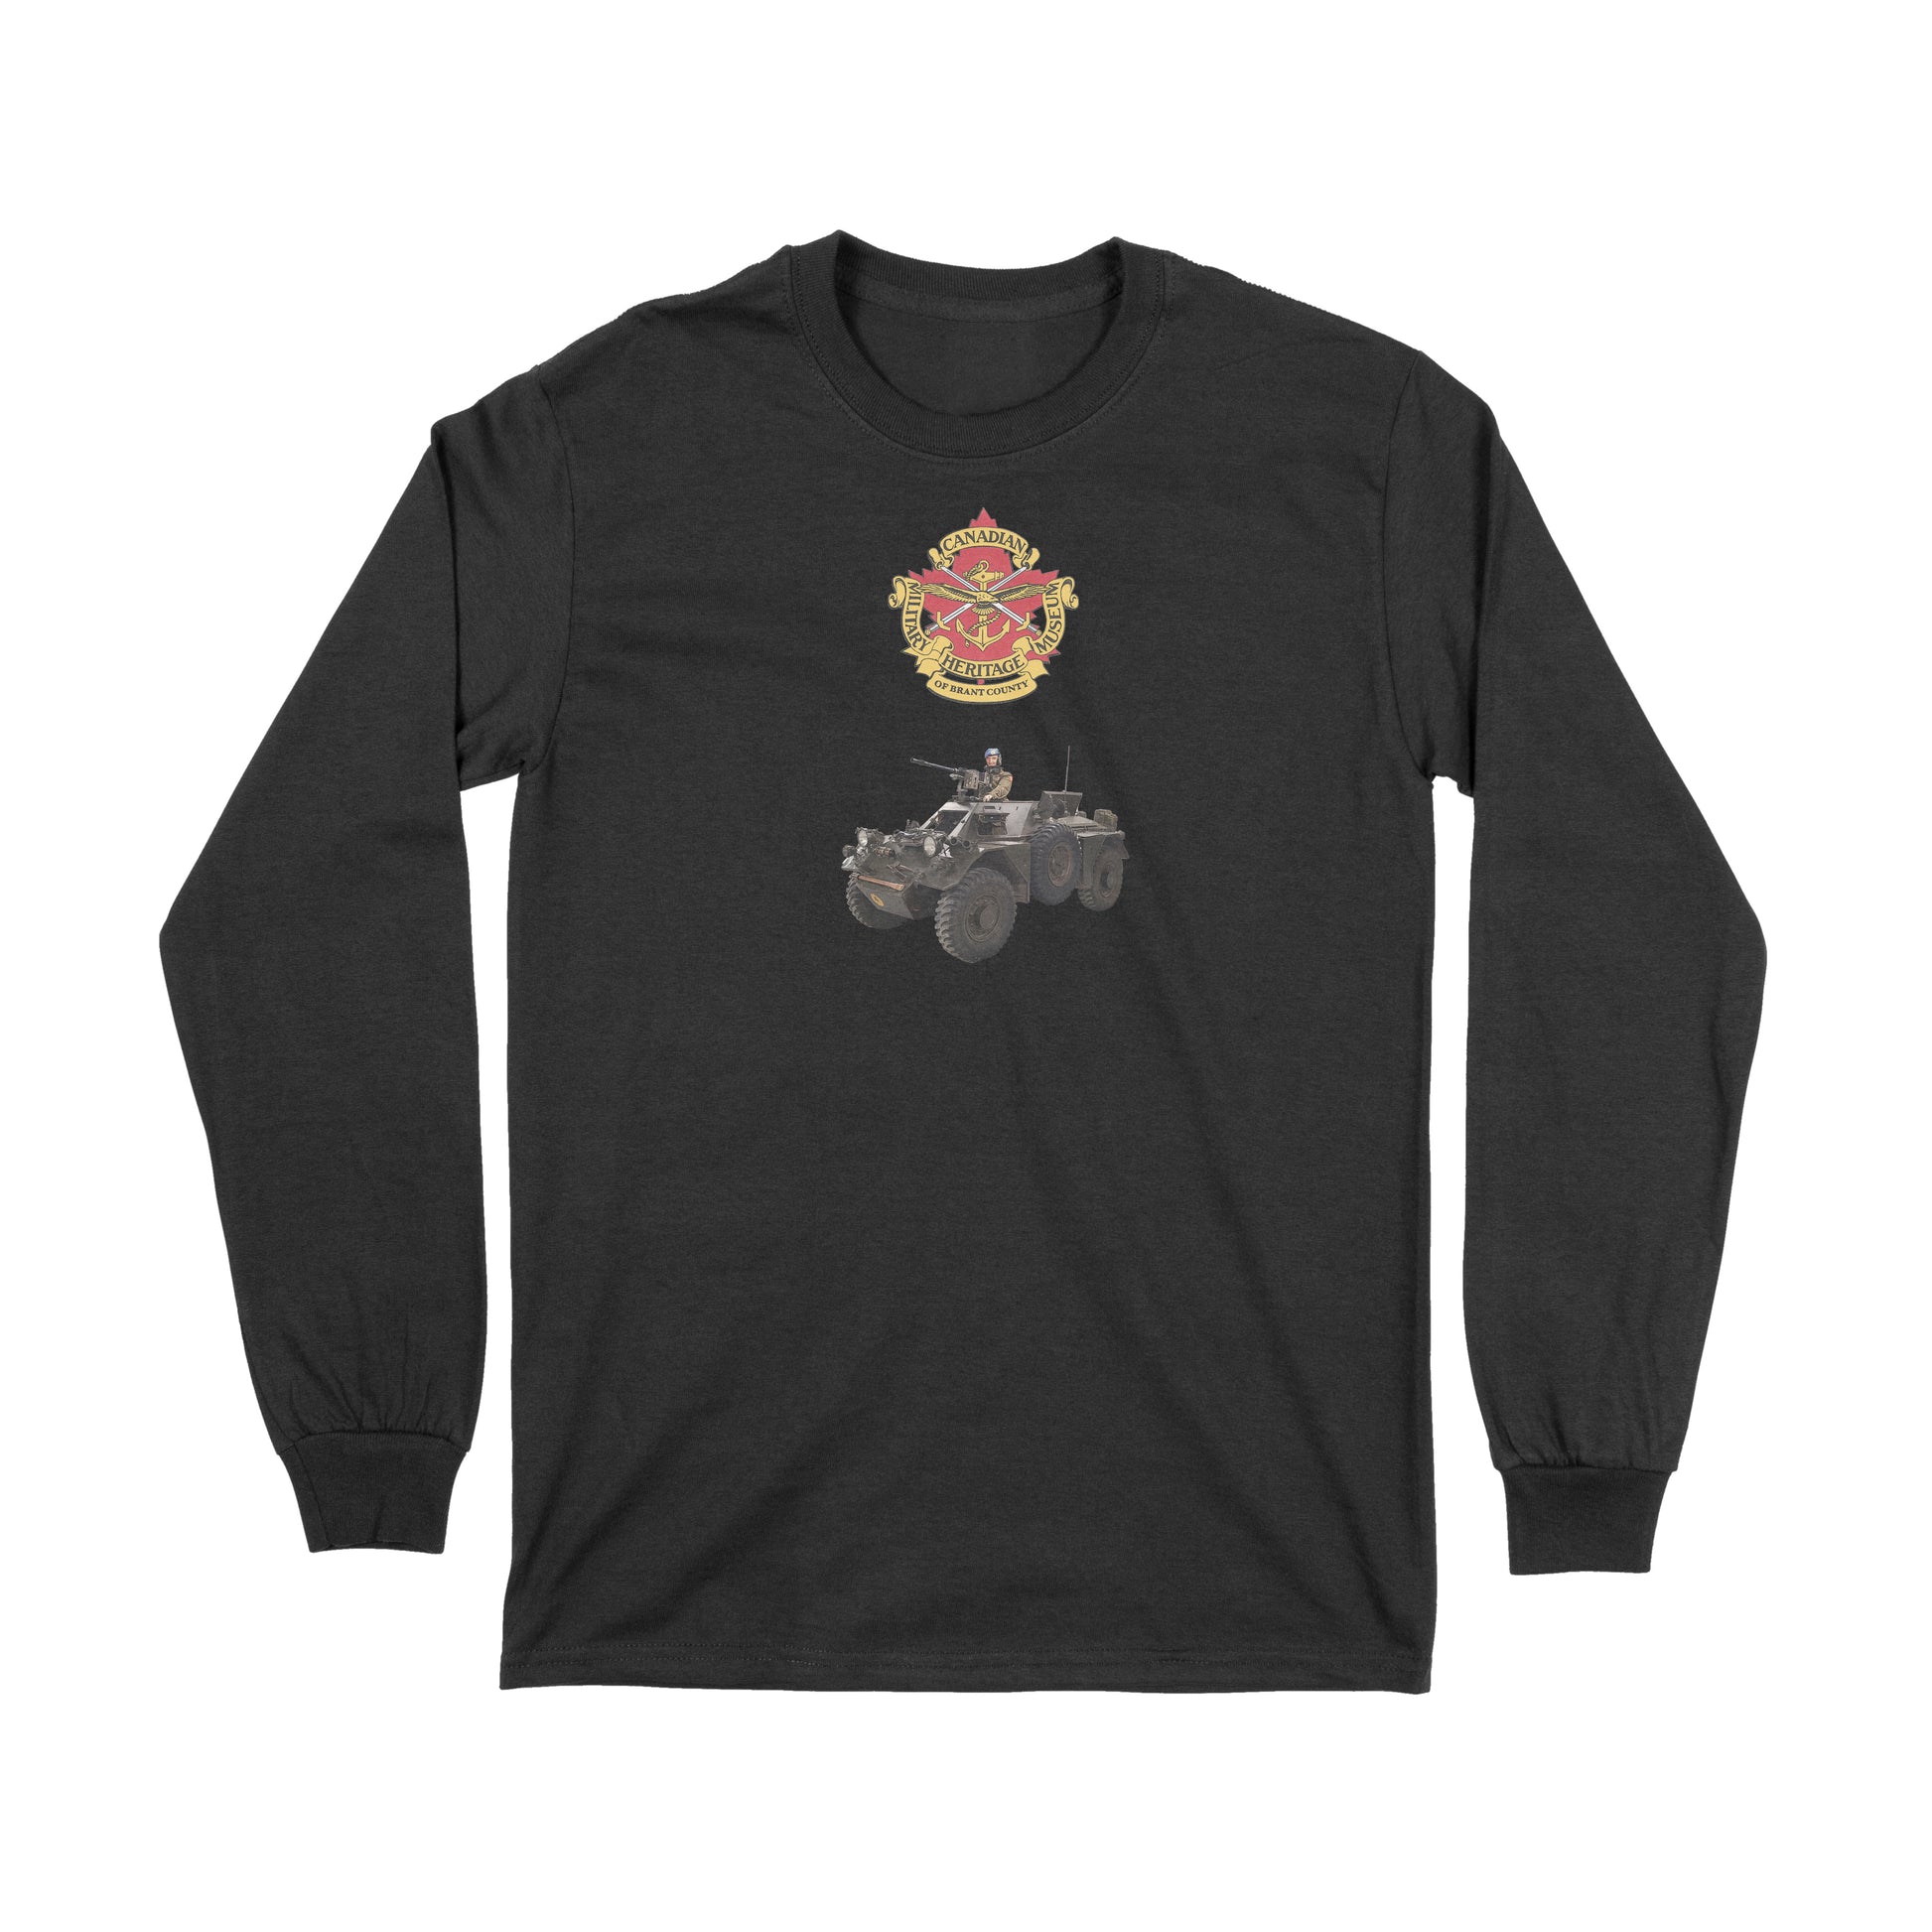 Brantford, Canadian Military Heritage Museum, Fat Dave, Ferret, Long Sleeve, Museum, Black